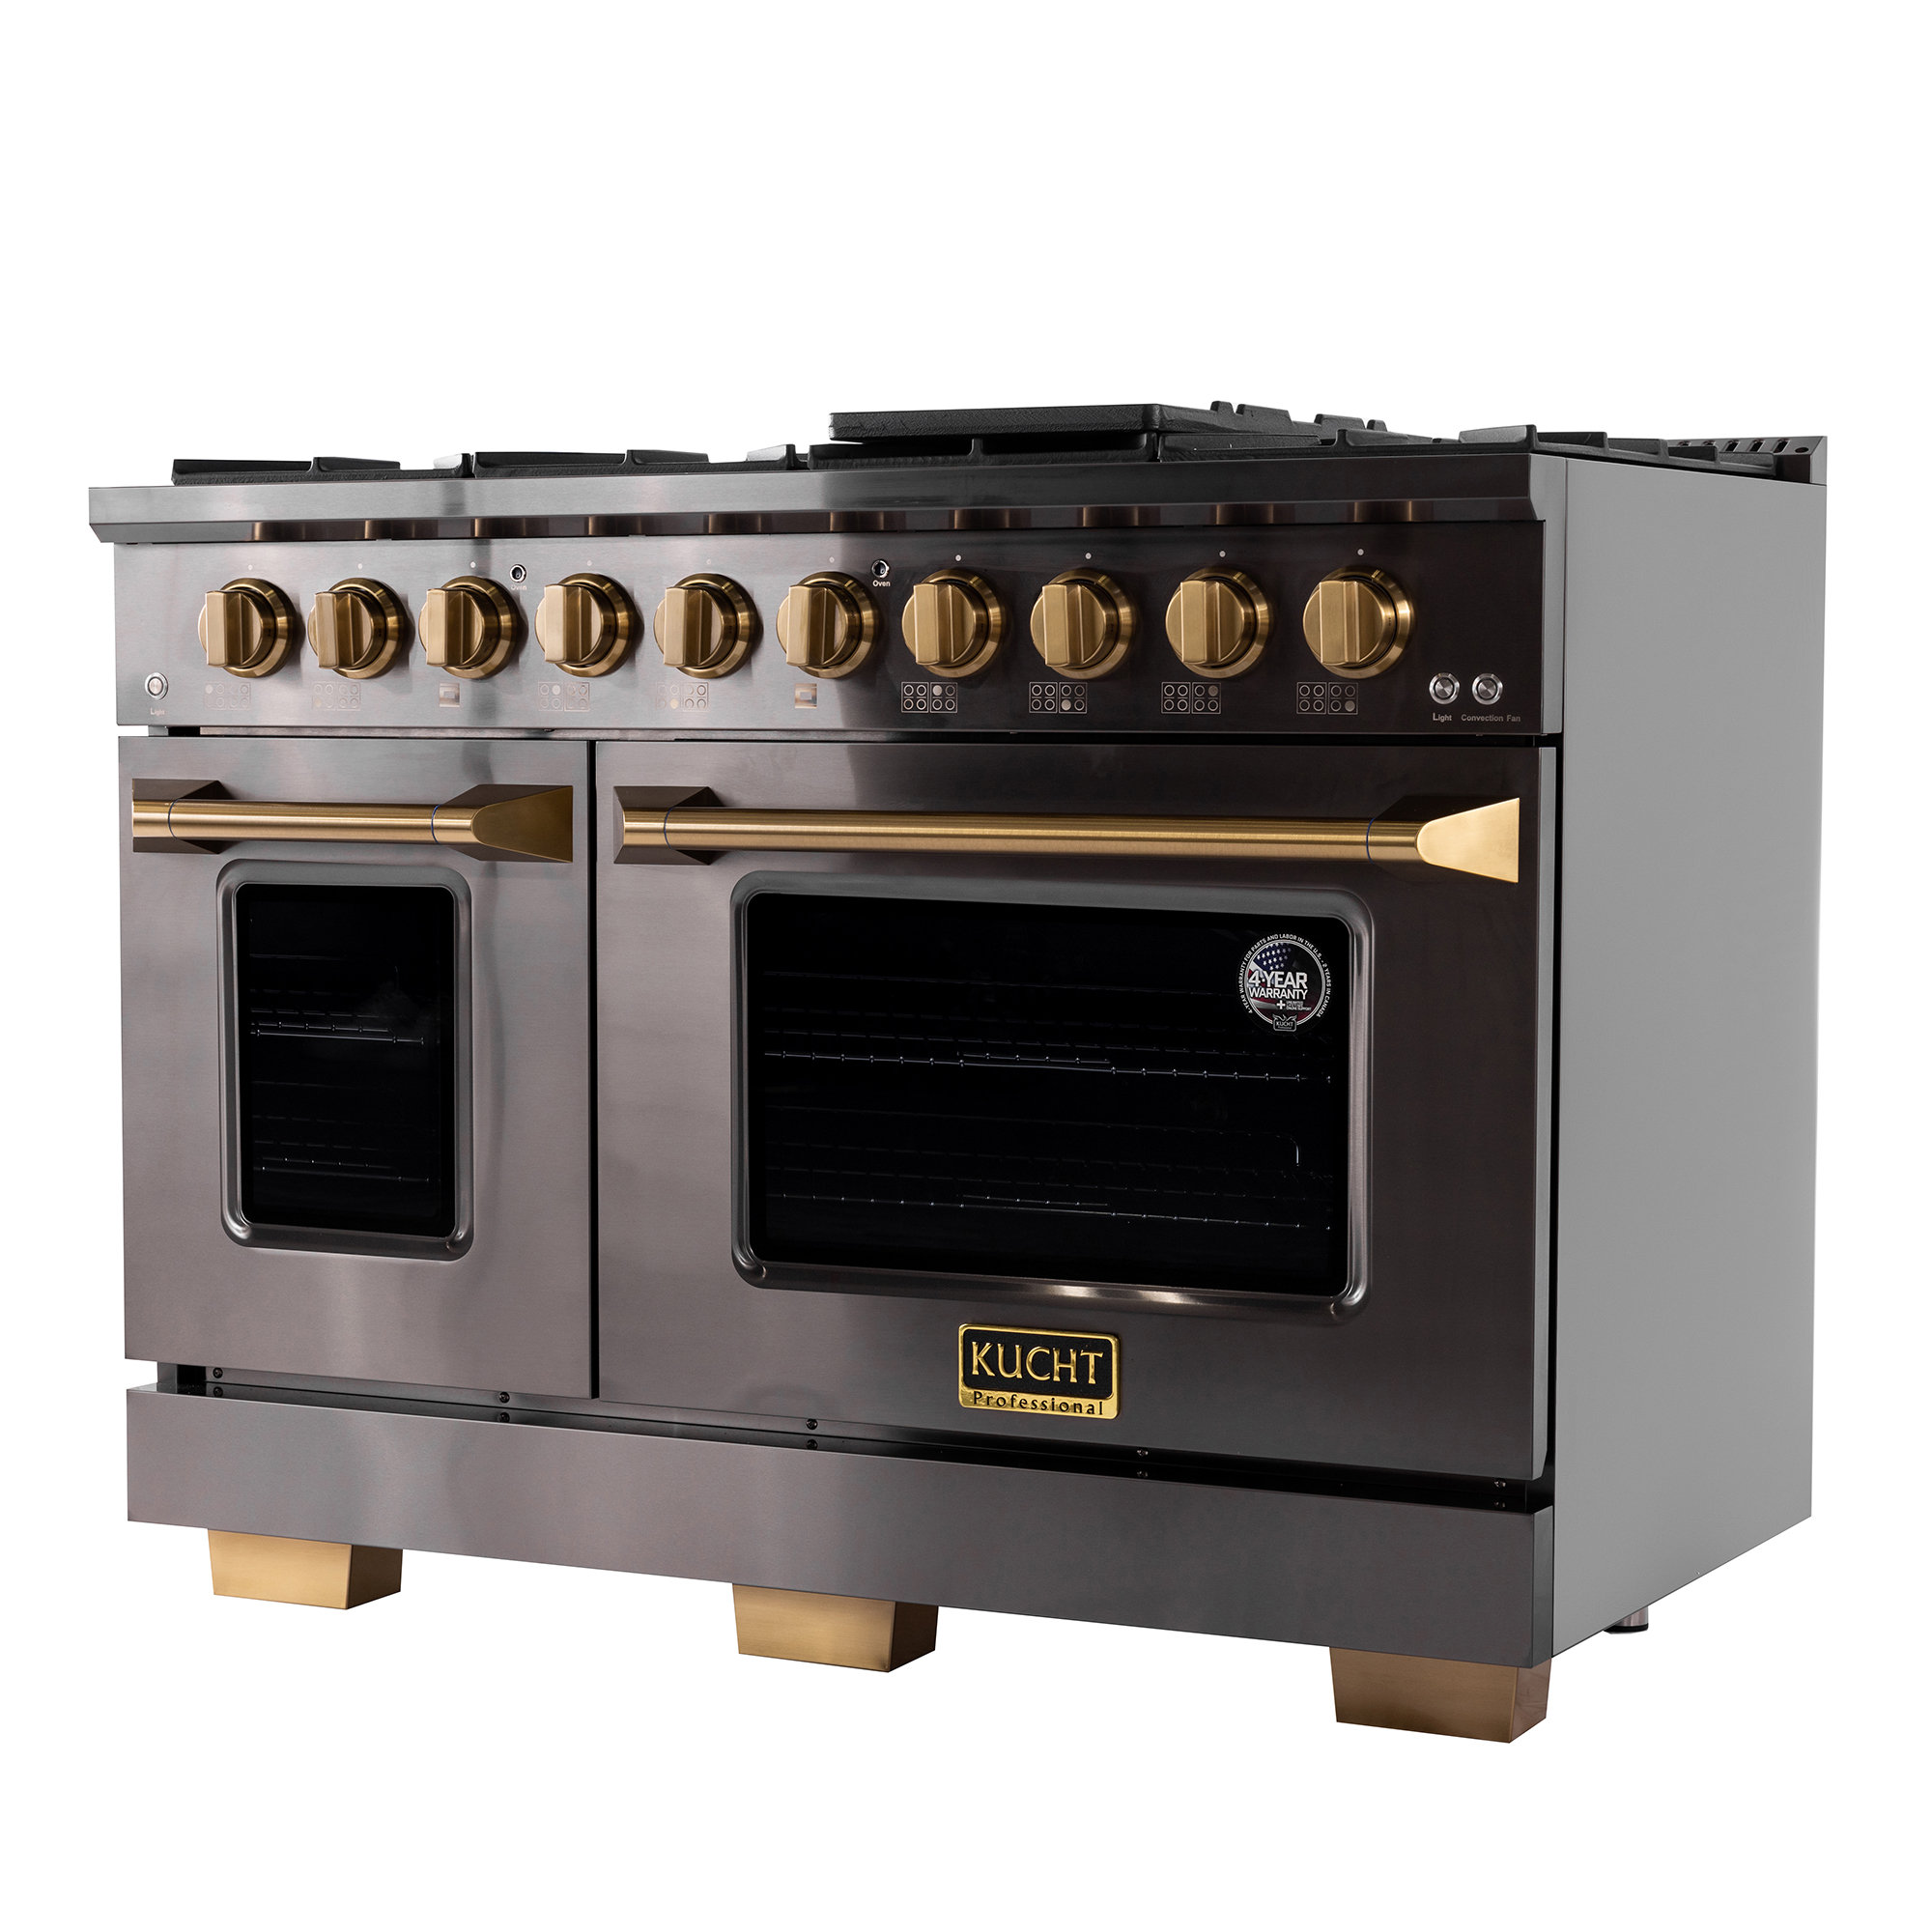 Akicon 36 Slide-in Freestanding Professional Style GAS Range with 5.2 Cu. ft. Oven, 6 Burners, Convection Fan, Cast Iron Grates - Stainless Steel